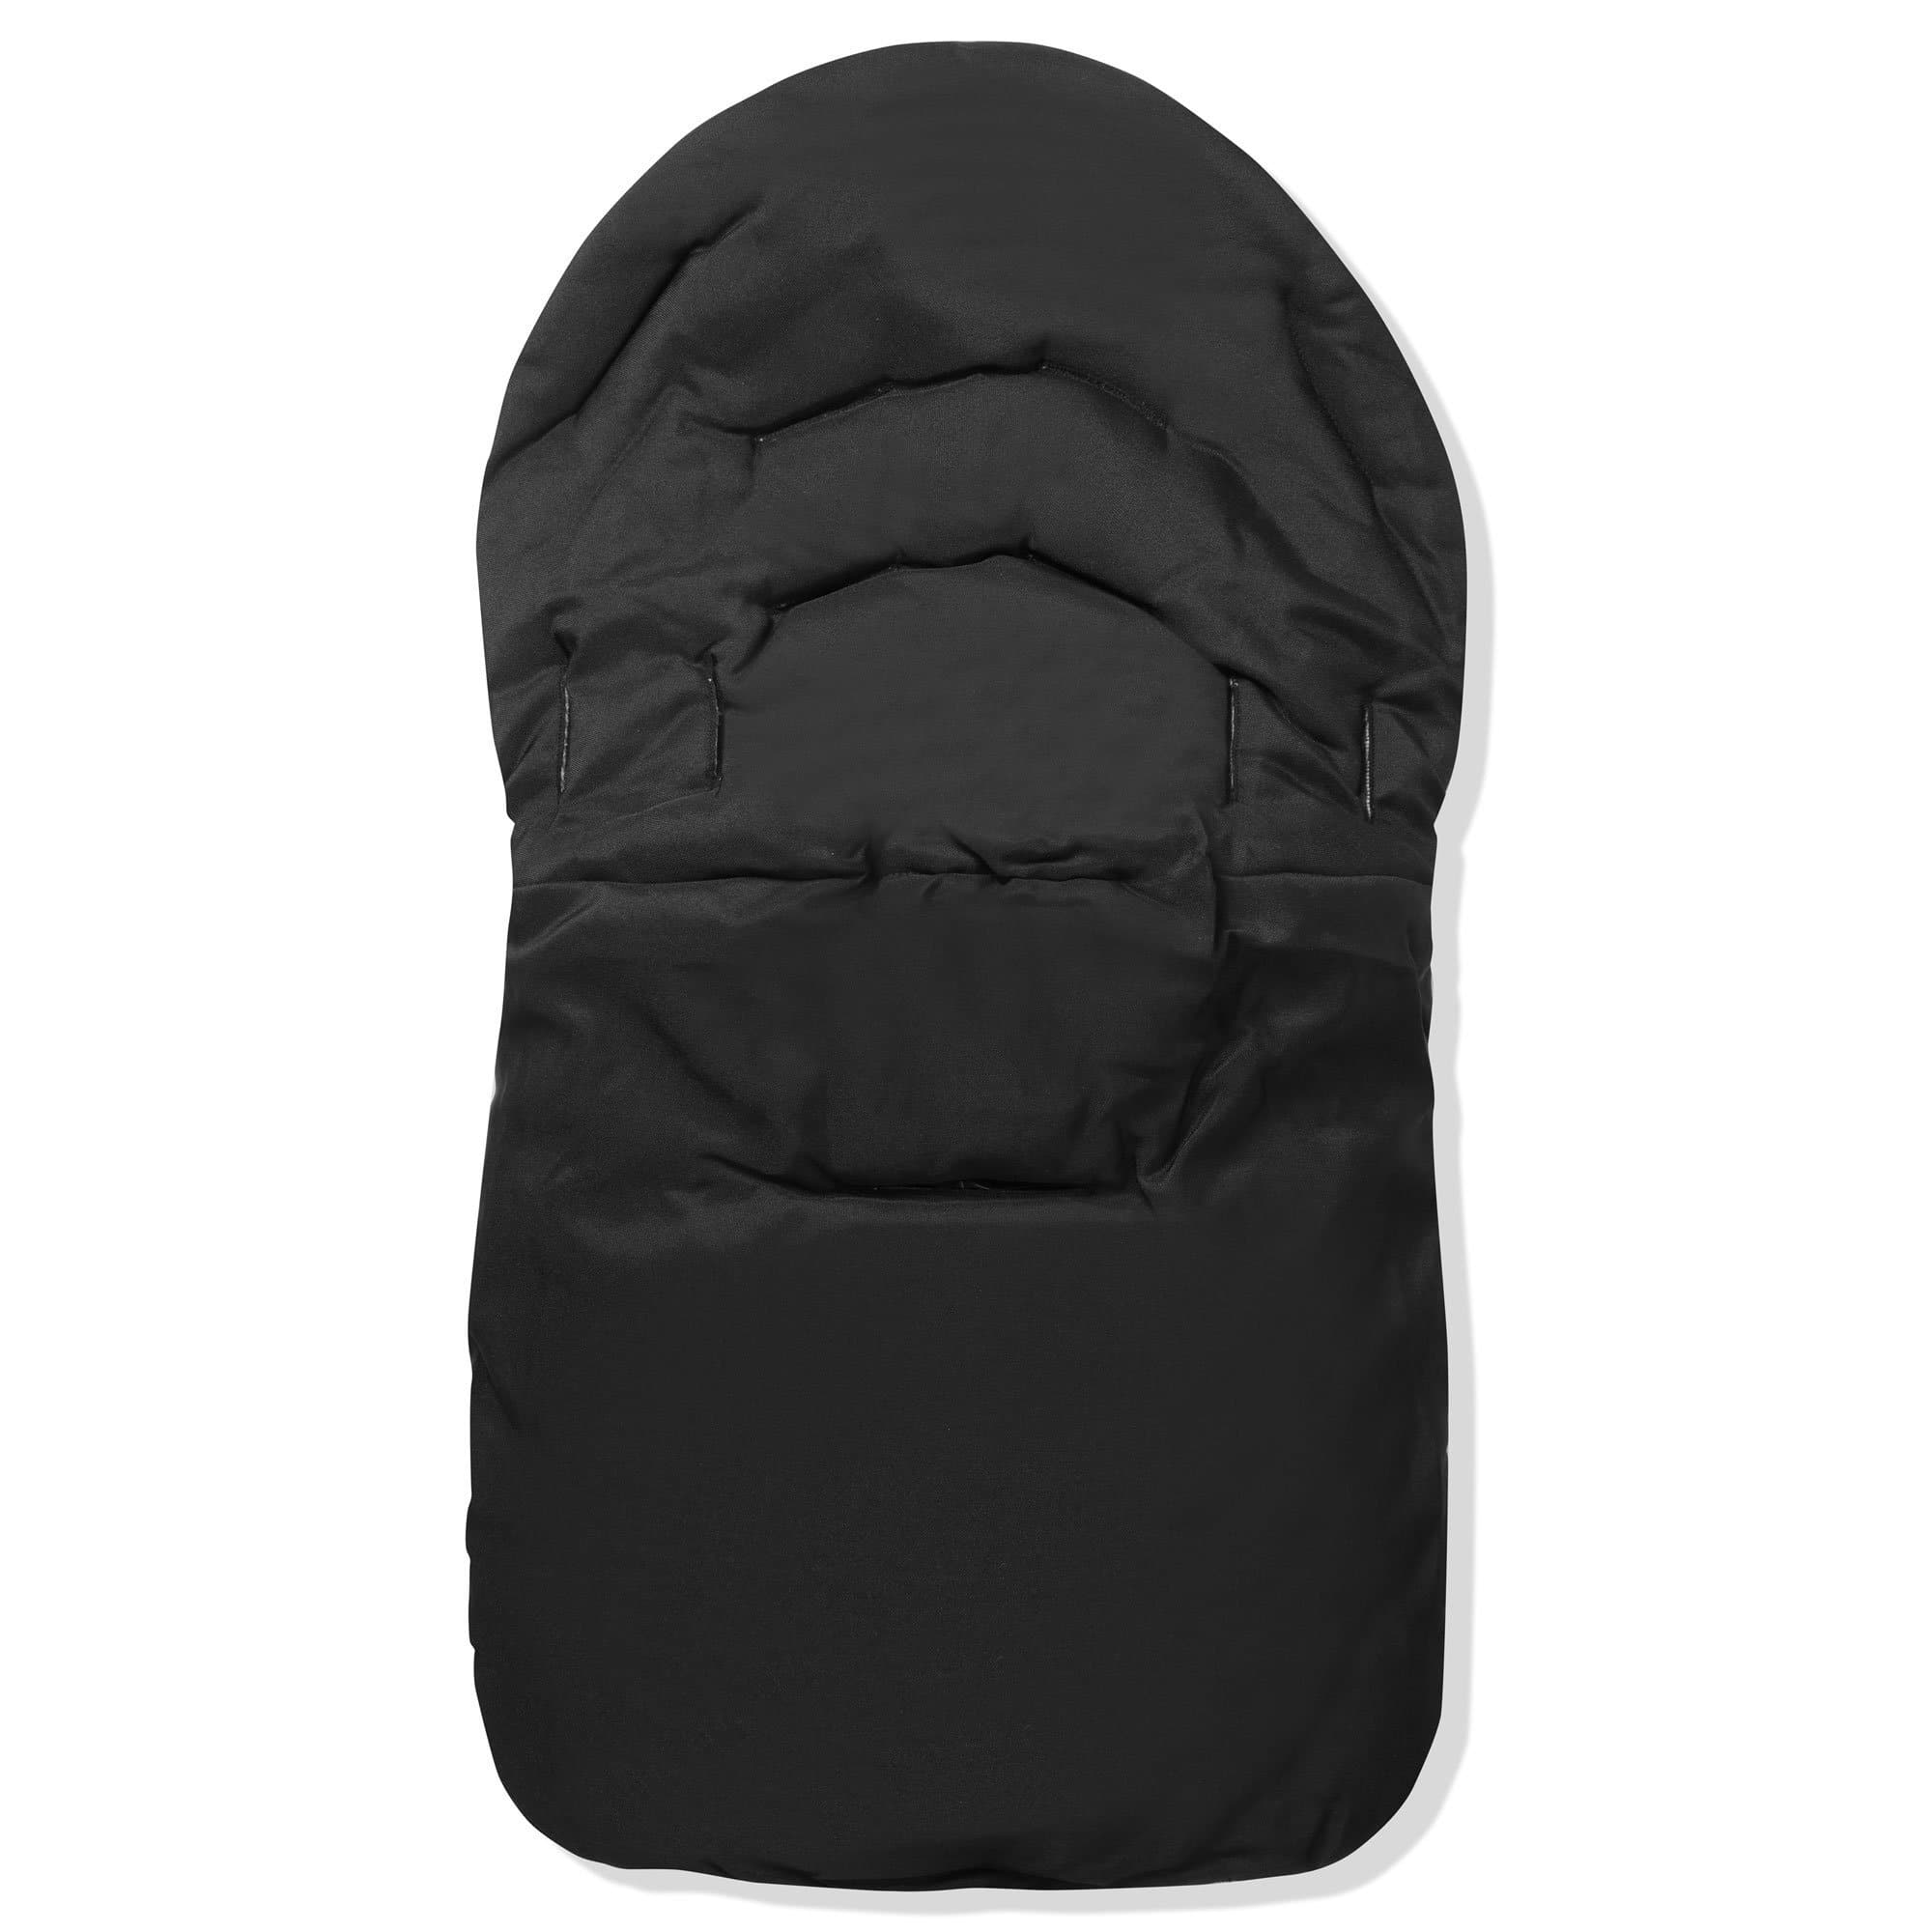 Car Seat Footmuff / Cosy Toes Compatible with ABC Design -  | For Your Little One